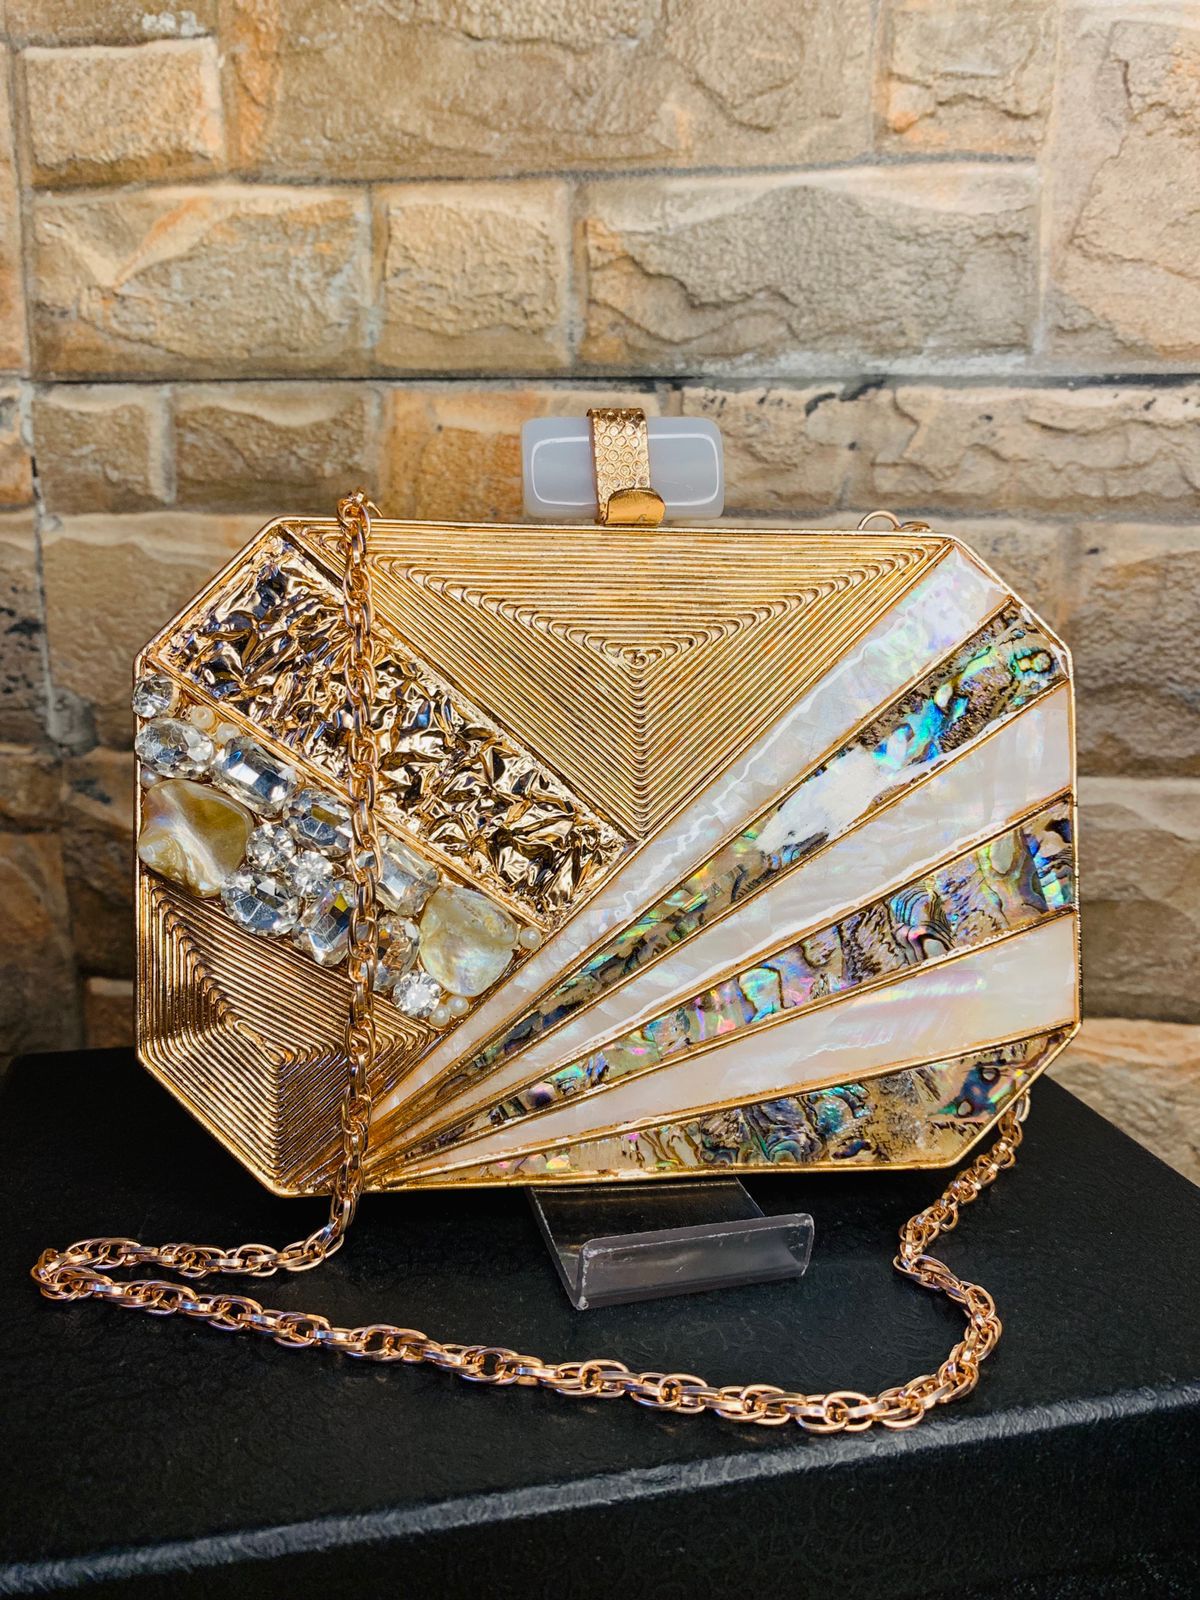 PREMIUM gold mother of pearl oval clutch with designer knob